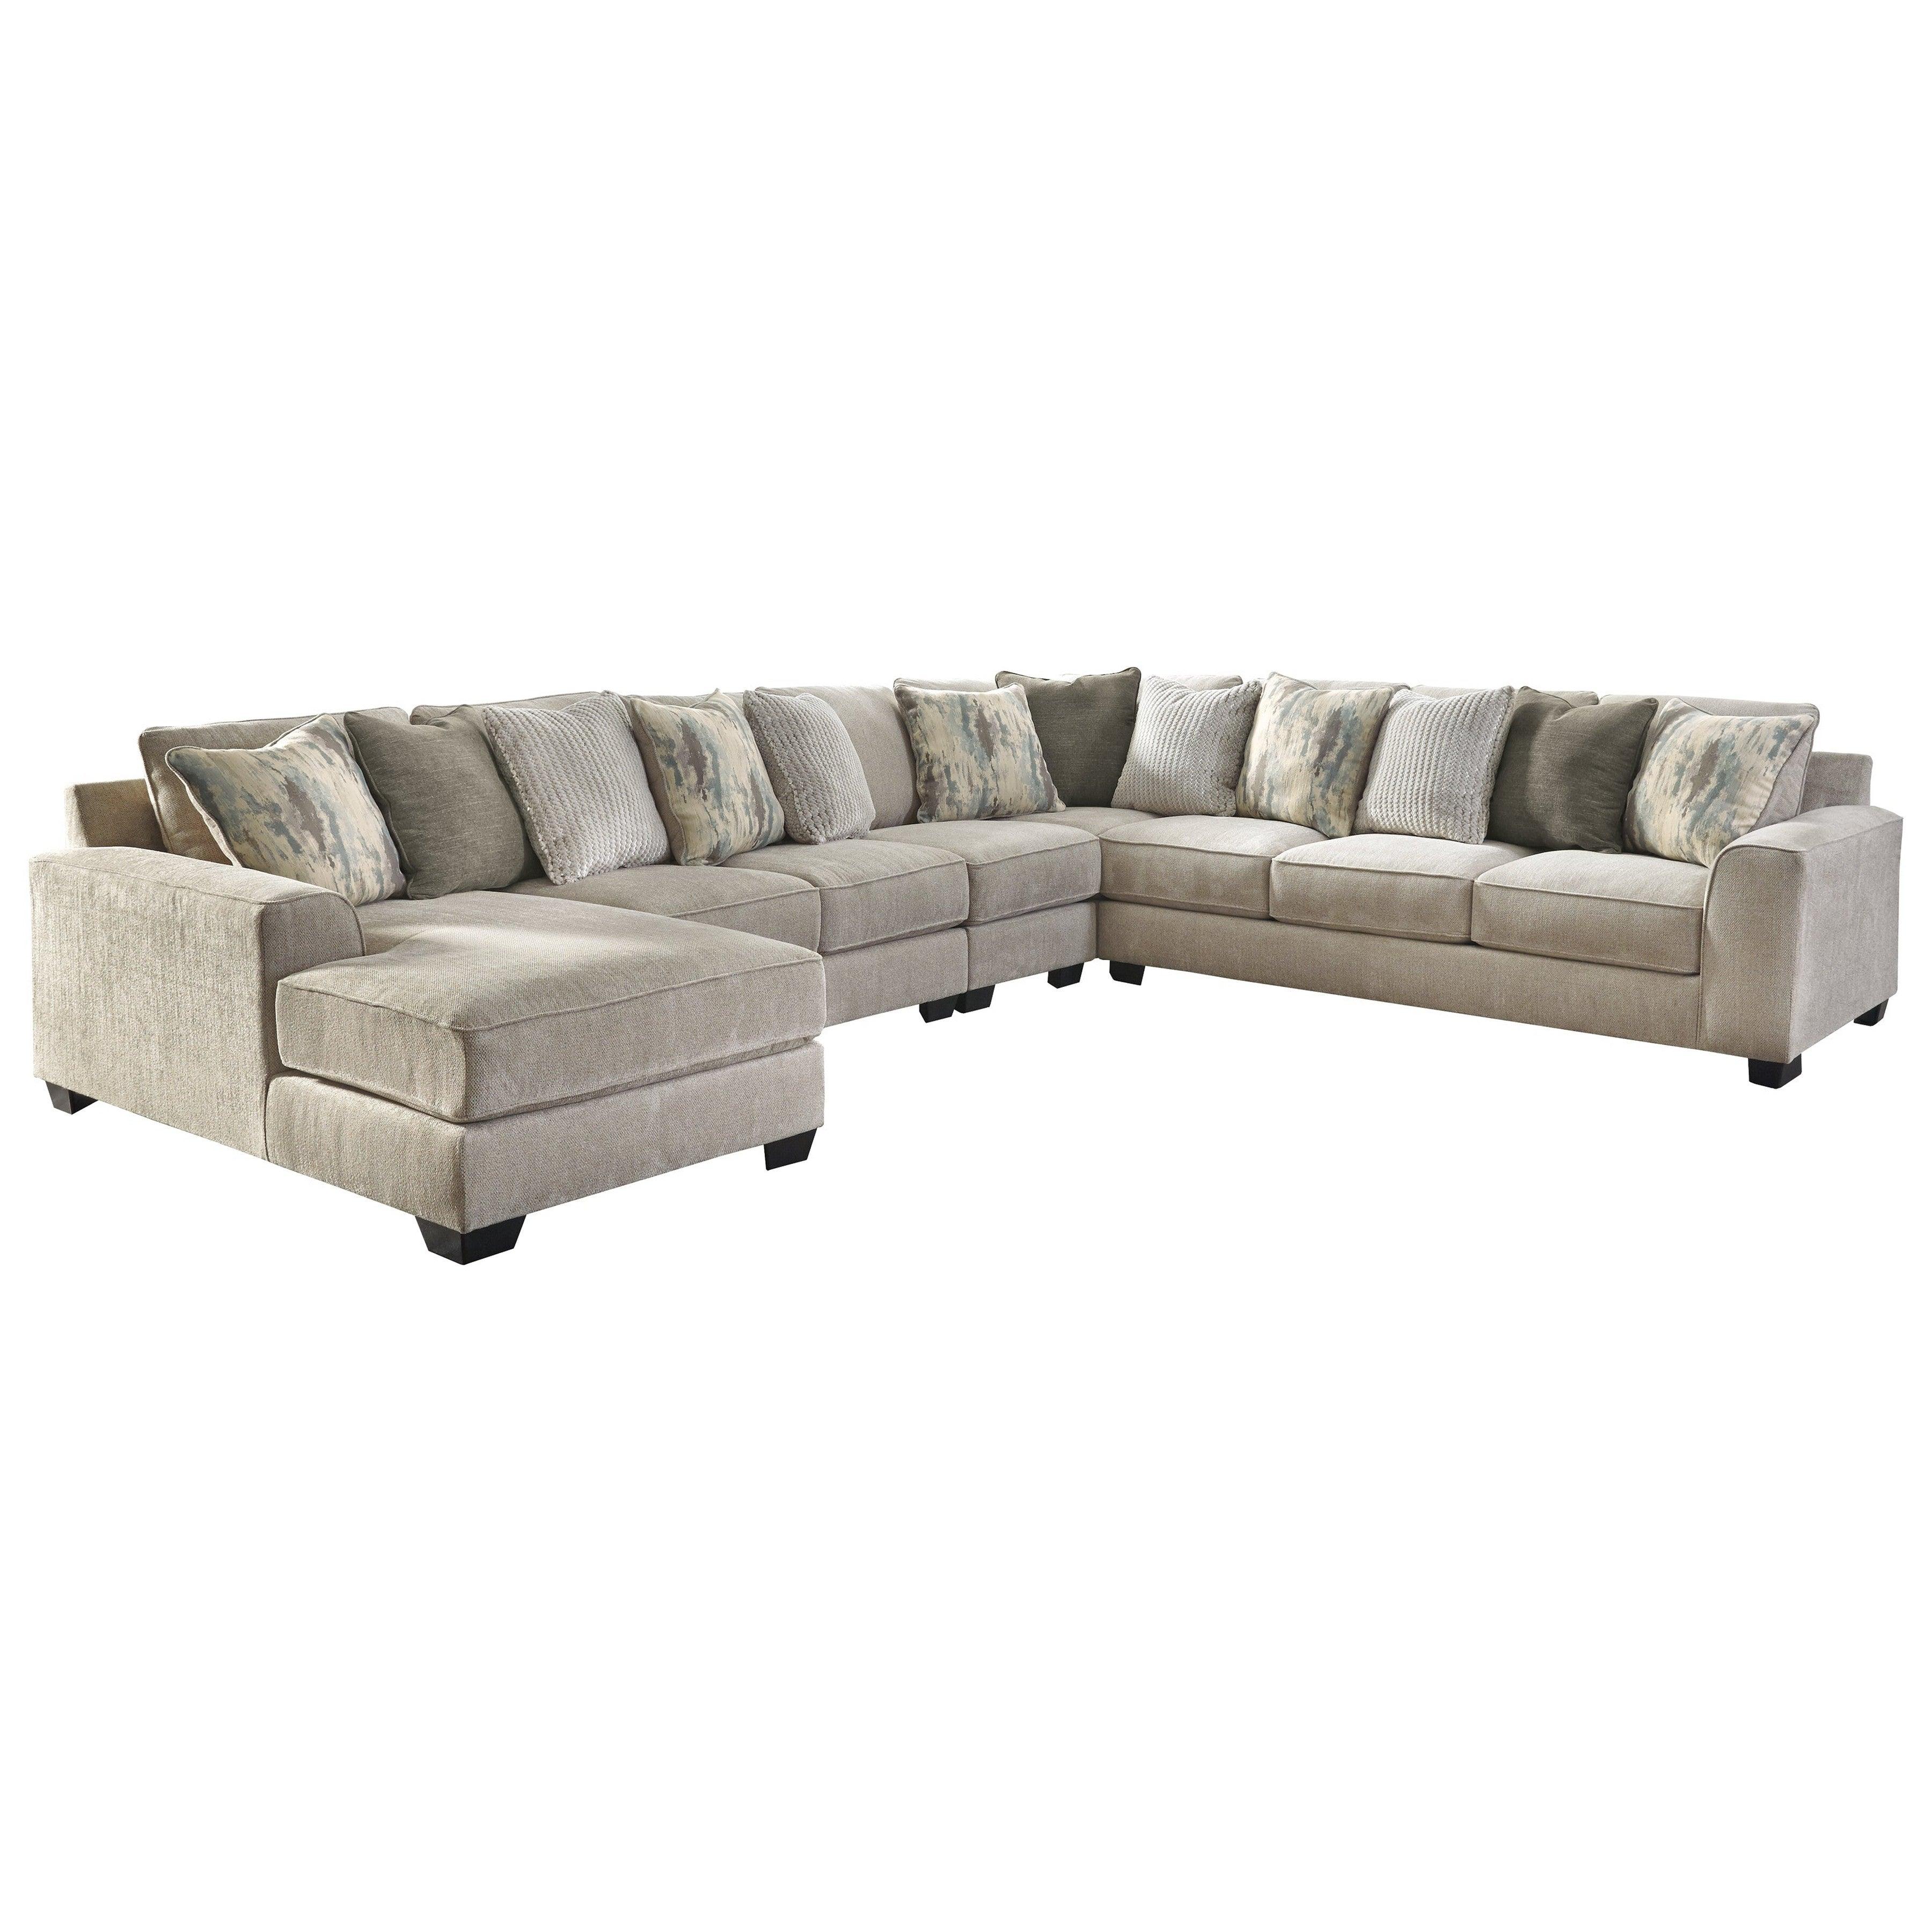 Ardsley 5-Piece Sectional with Chaise Ash-39504S7